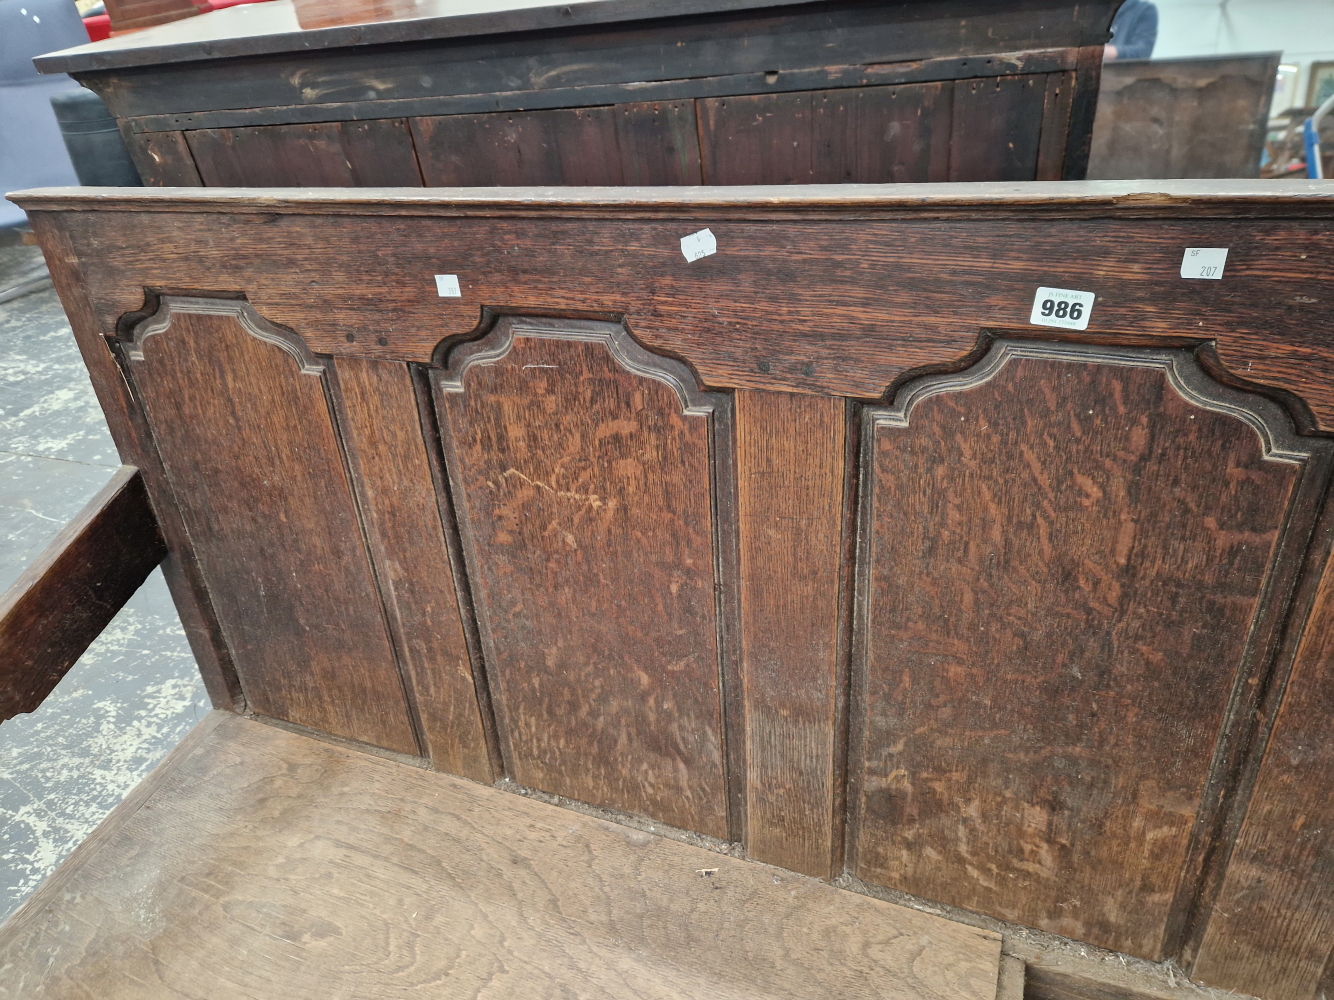 AN 18th C. OAK SETTLE WITH A FIVE PANEL BACK FLANKED BY ARMS ABOVE CABRIOLE FRONT LEGS ON PAD FEET - Image 7 of 7